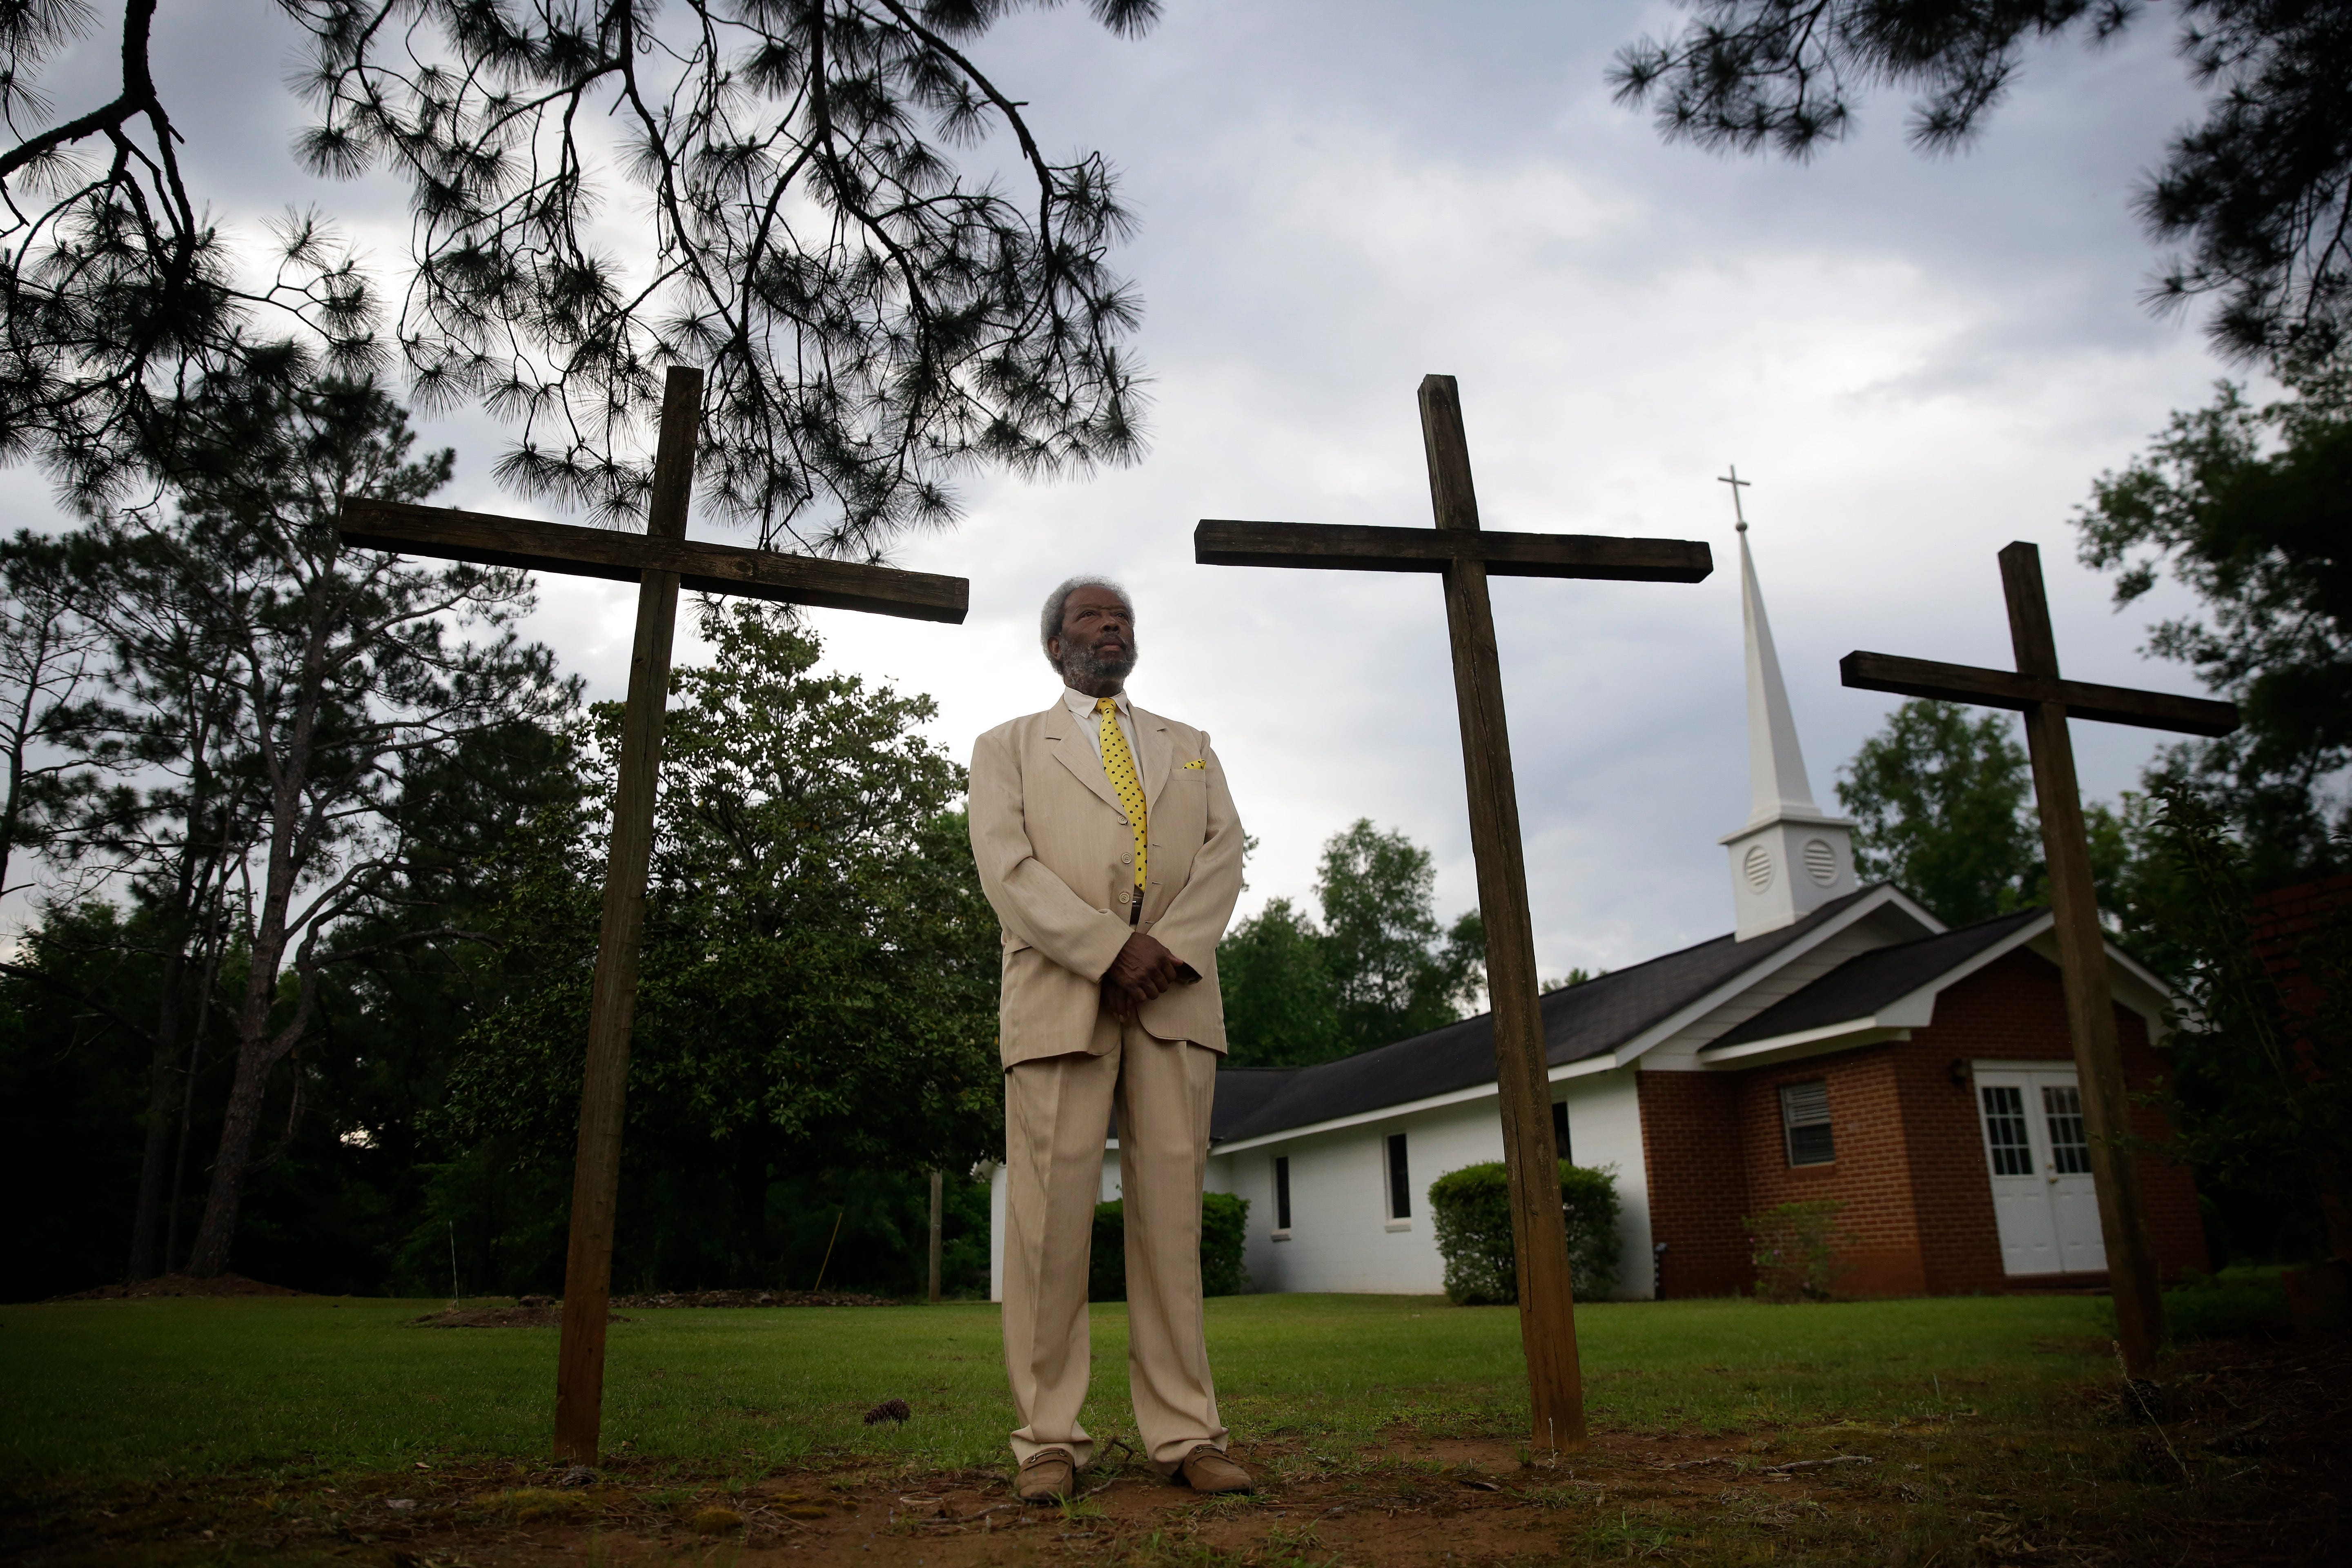 Eddie Keith, 65, of Dawson, Ga., poses for a portrait outside of his church on Sunday, April 19, 2020, in Dawson, Ga. Keith lost his pastor to COVID-19. Keith has worked at Albritten's Funeral Service for around 35 years and was the person to retrieve his pastor. He felt like he'd lost a brother. "Why God? Why God? Why God?" Keith thought as he retrieved his pastor.